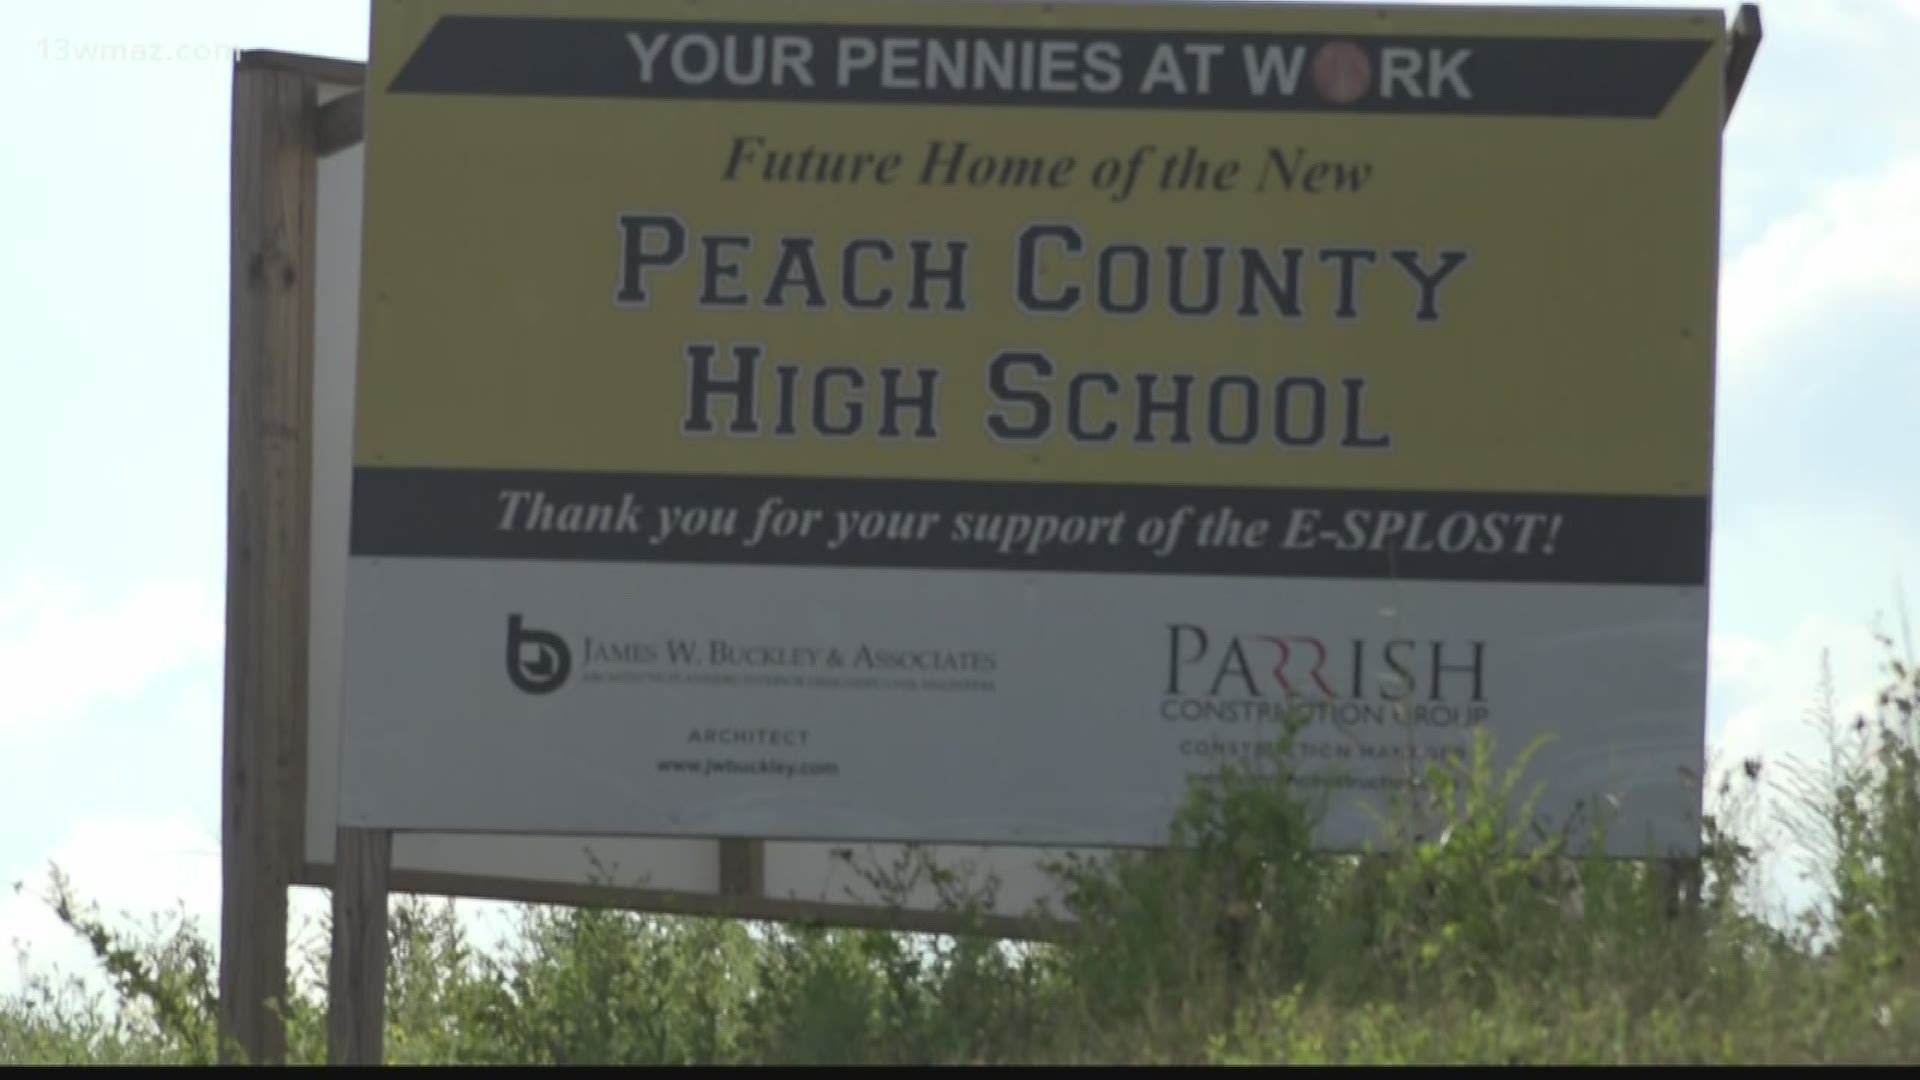 The Peach County High Trojans will have a new home soon, thanks to ESPLOST dollars. The new high school will sit along Highway 49 in Fort Valley.